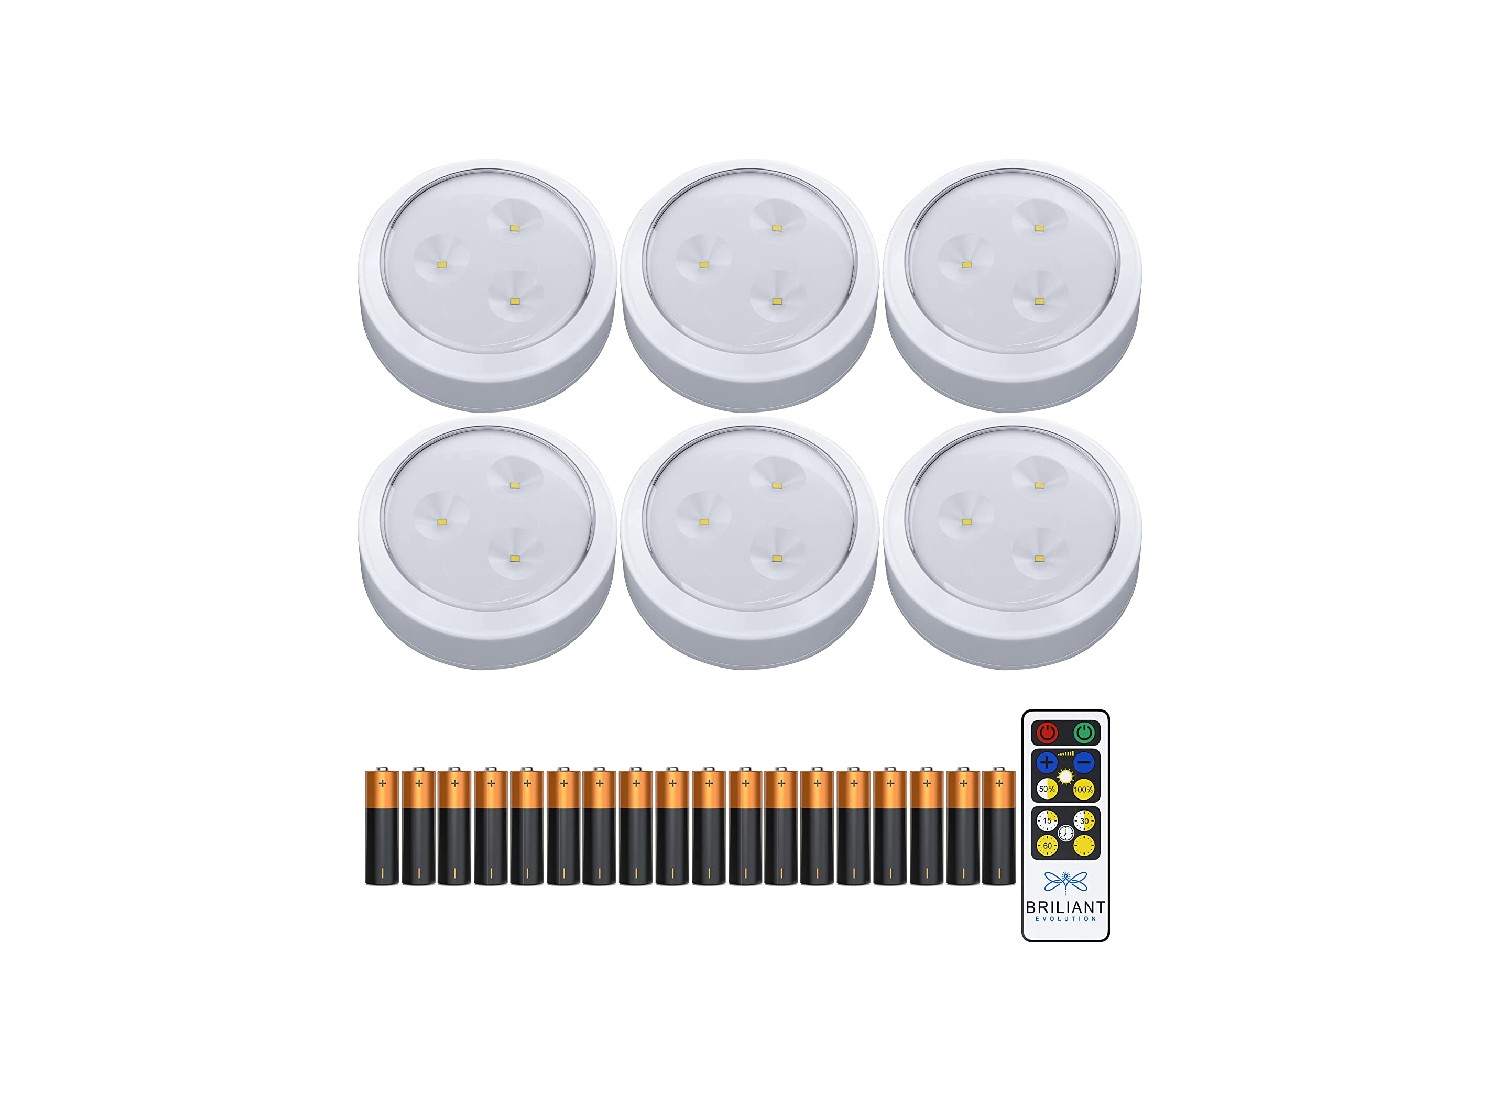 Brilliant Evolution LED White Wireless Under Cabinet Light with